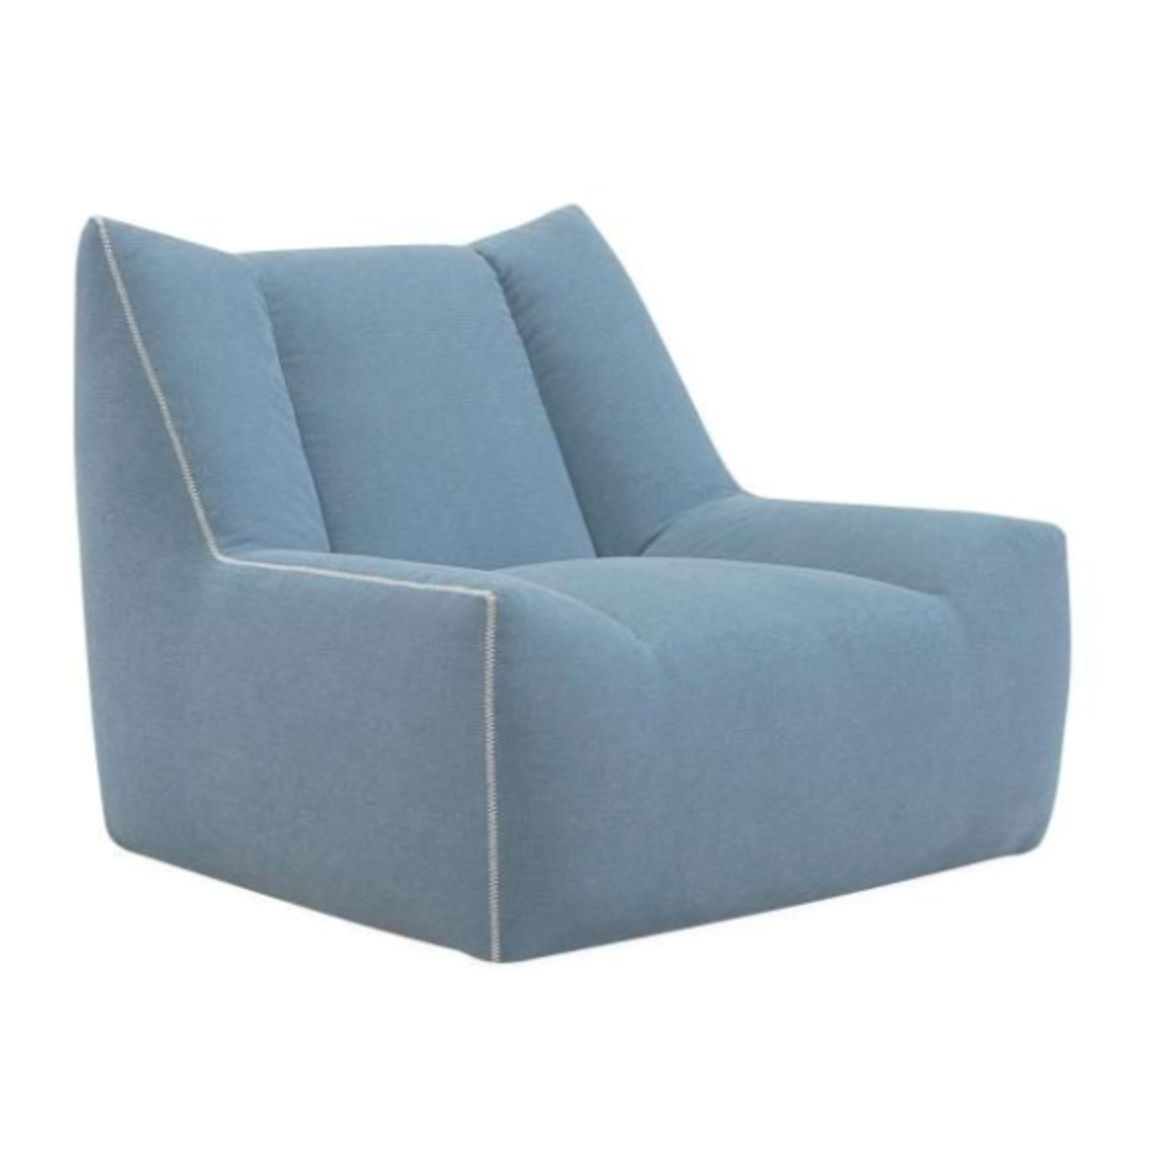 LIDO OUTDOOR SWIVEL CHAIR IN FRESNO ALABASTER